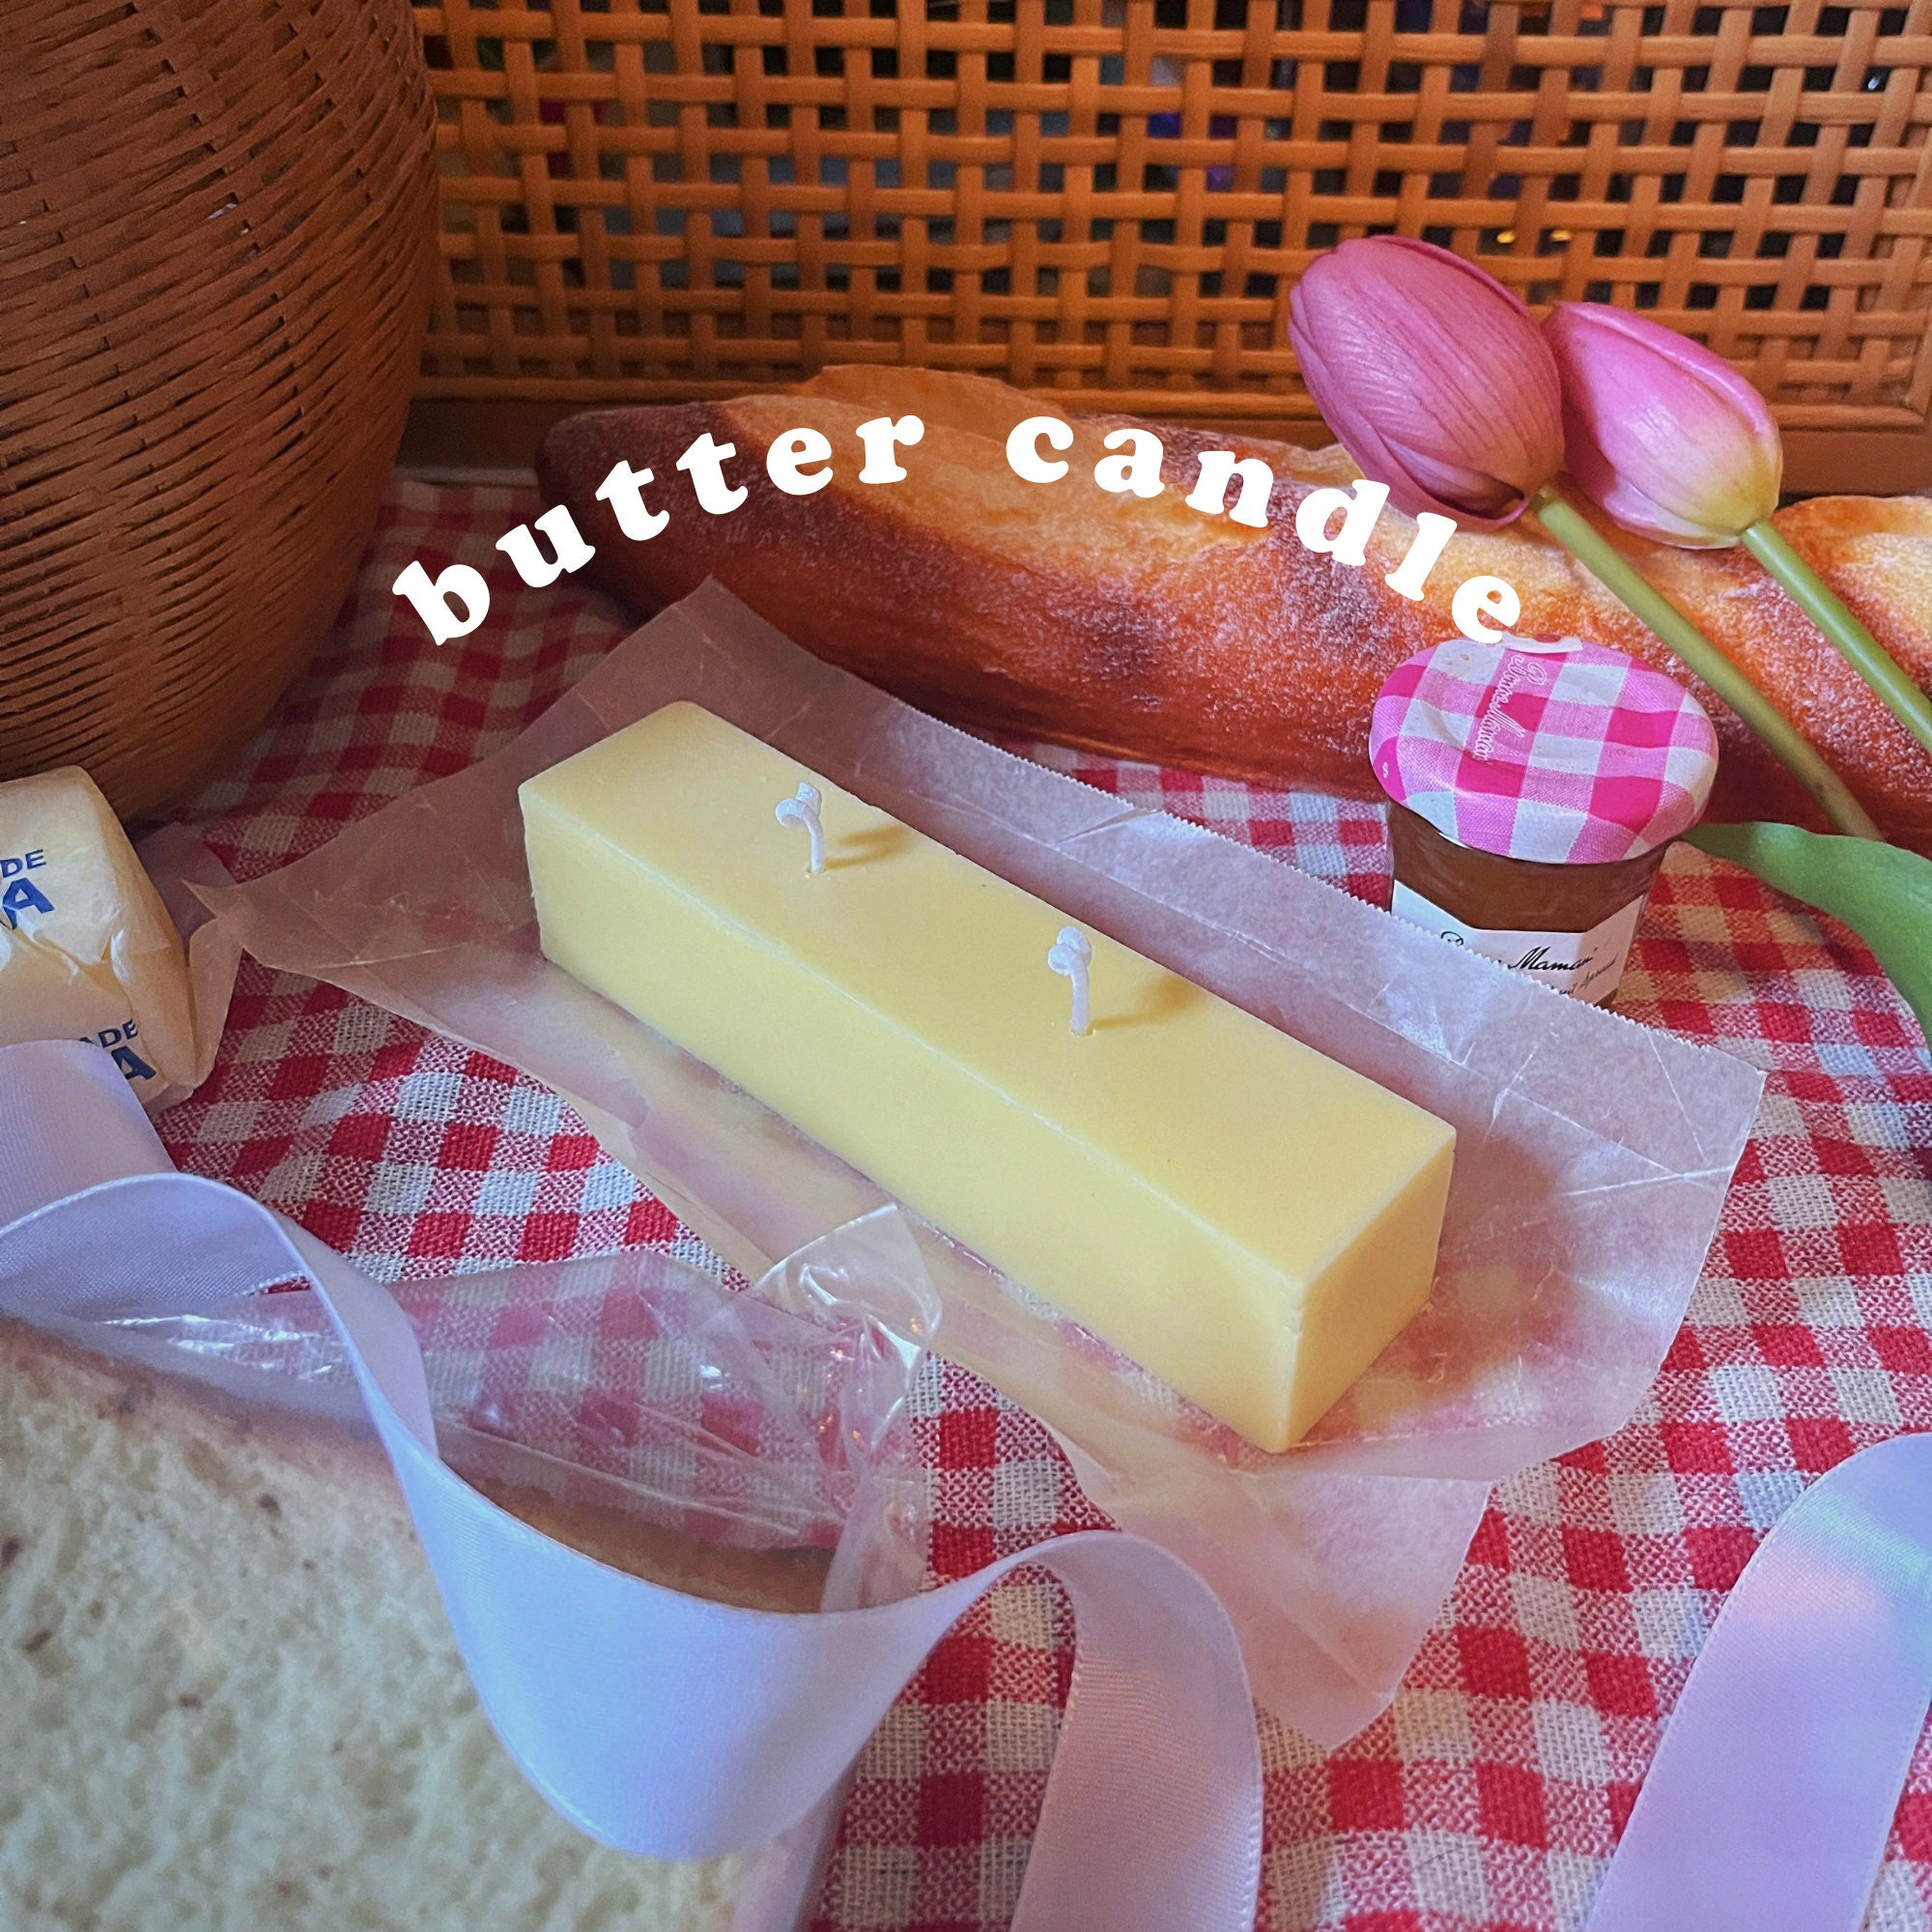 Butter Candle Full 